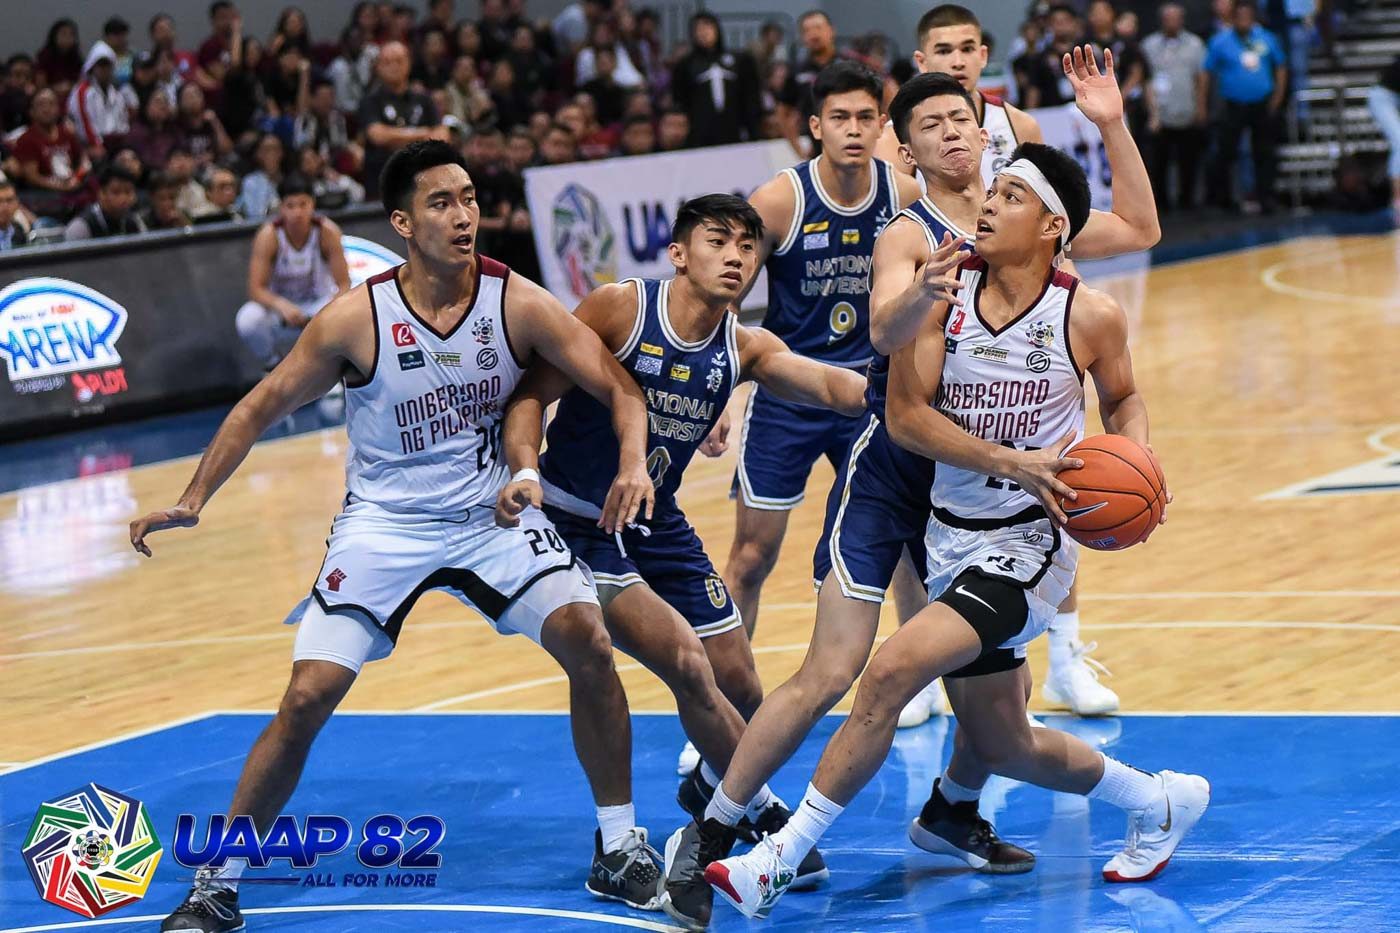 UAAP Top Quotes: On ball hogs and team pressure